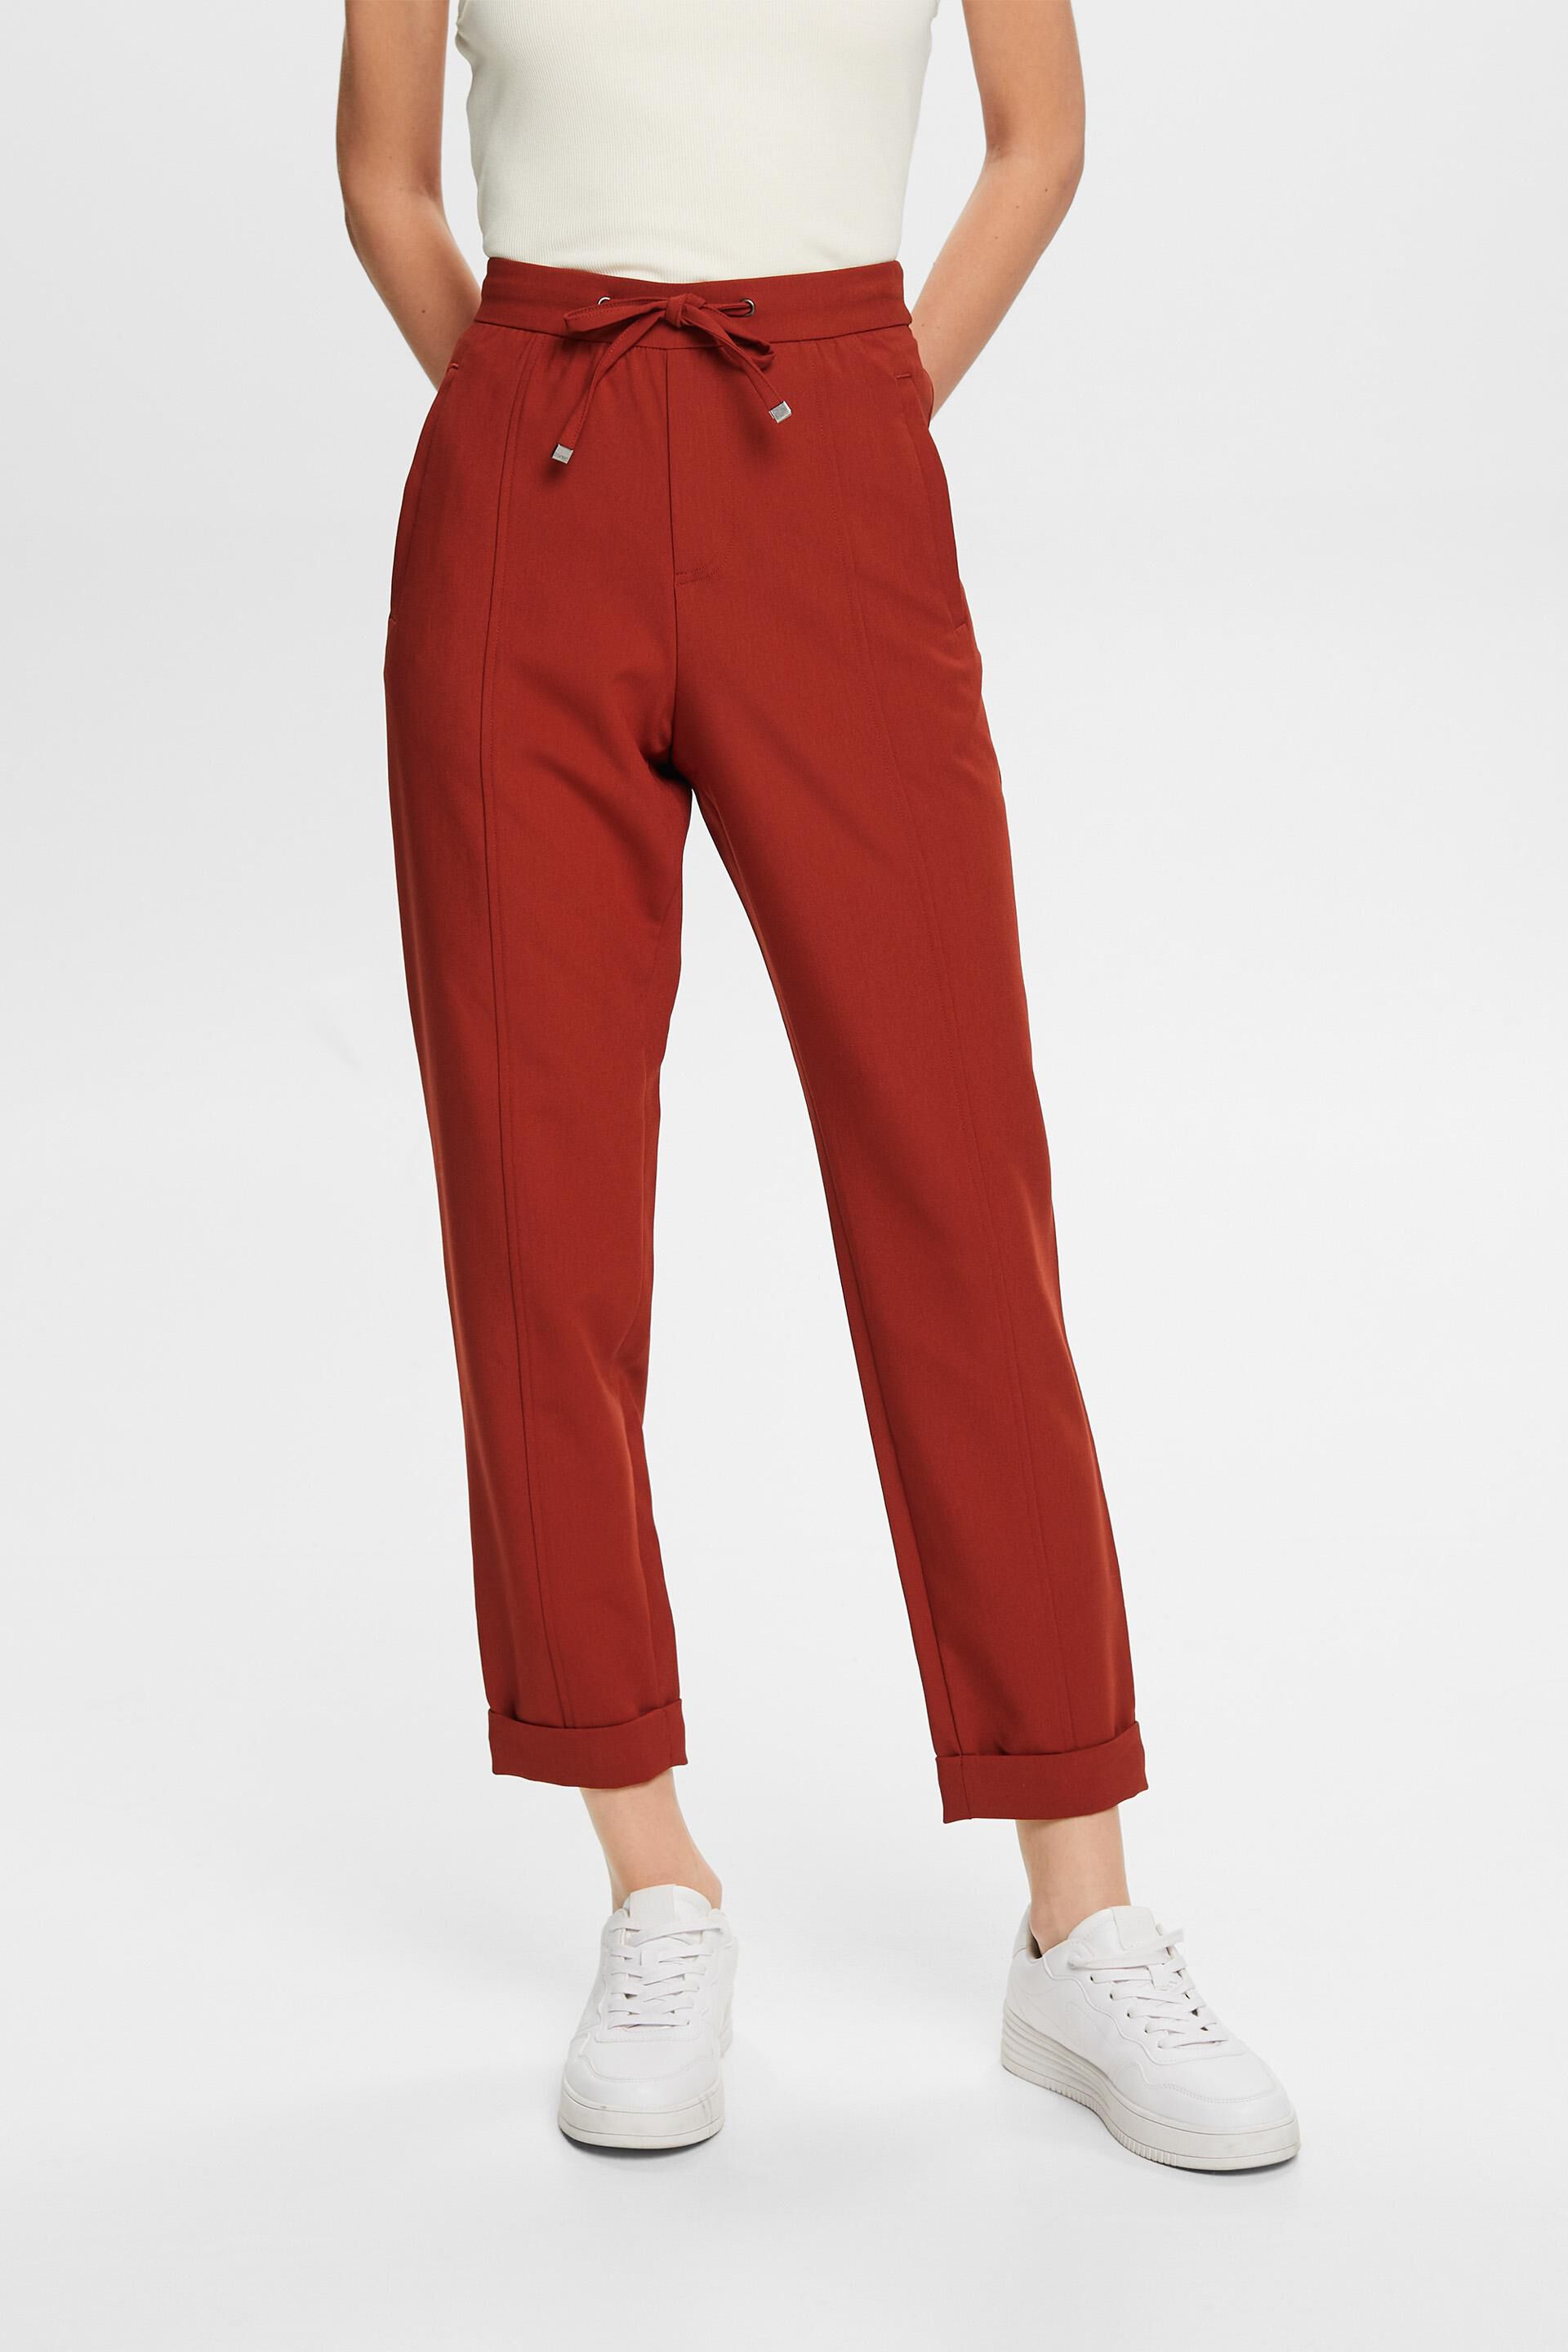 Esprit jogger trousers Mid-rise style